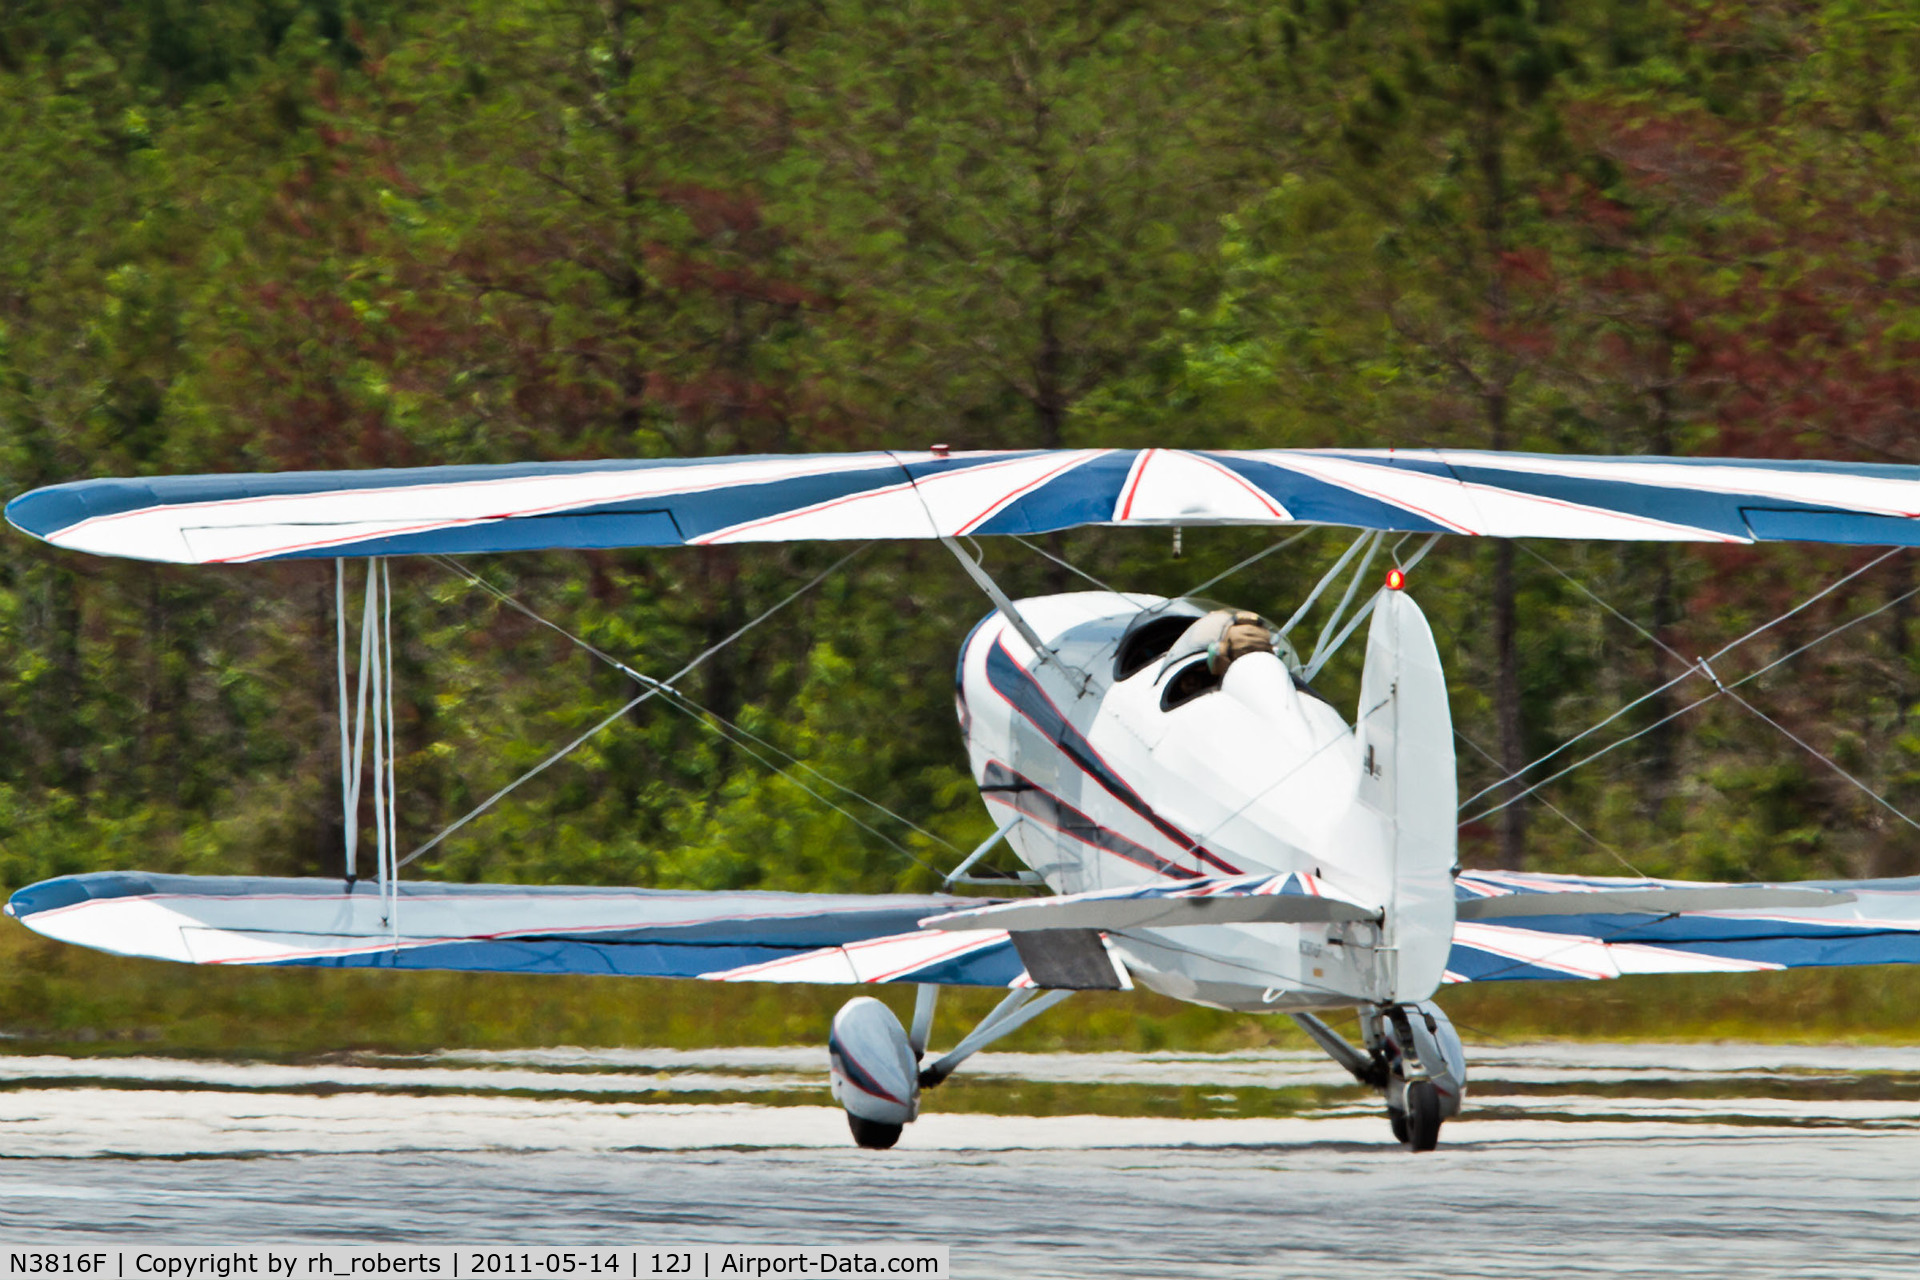 N3816F, 1977 Great Lakes 2T-1A-2 Sport Trainer C/N 0784, taxiing 12J